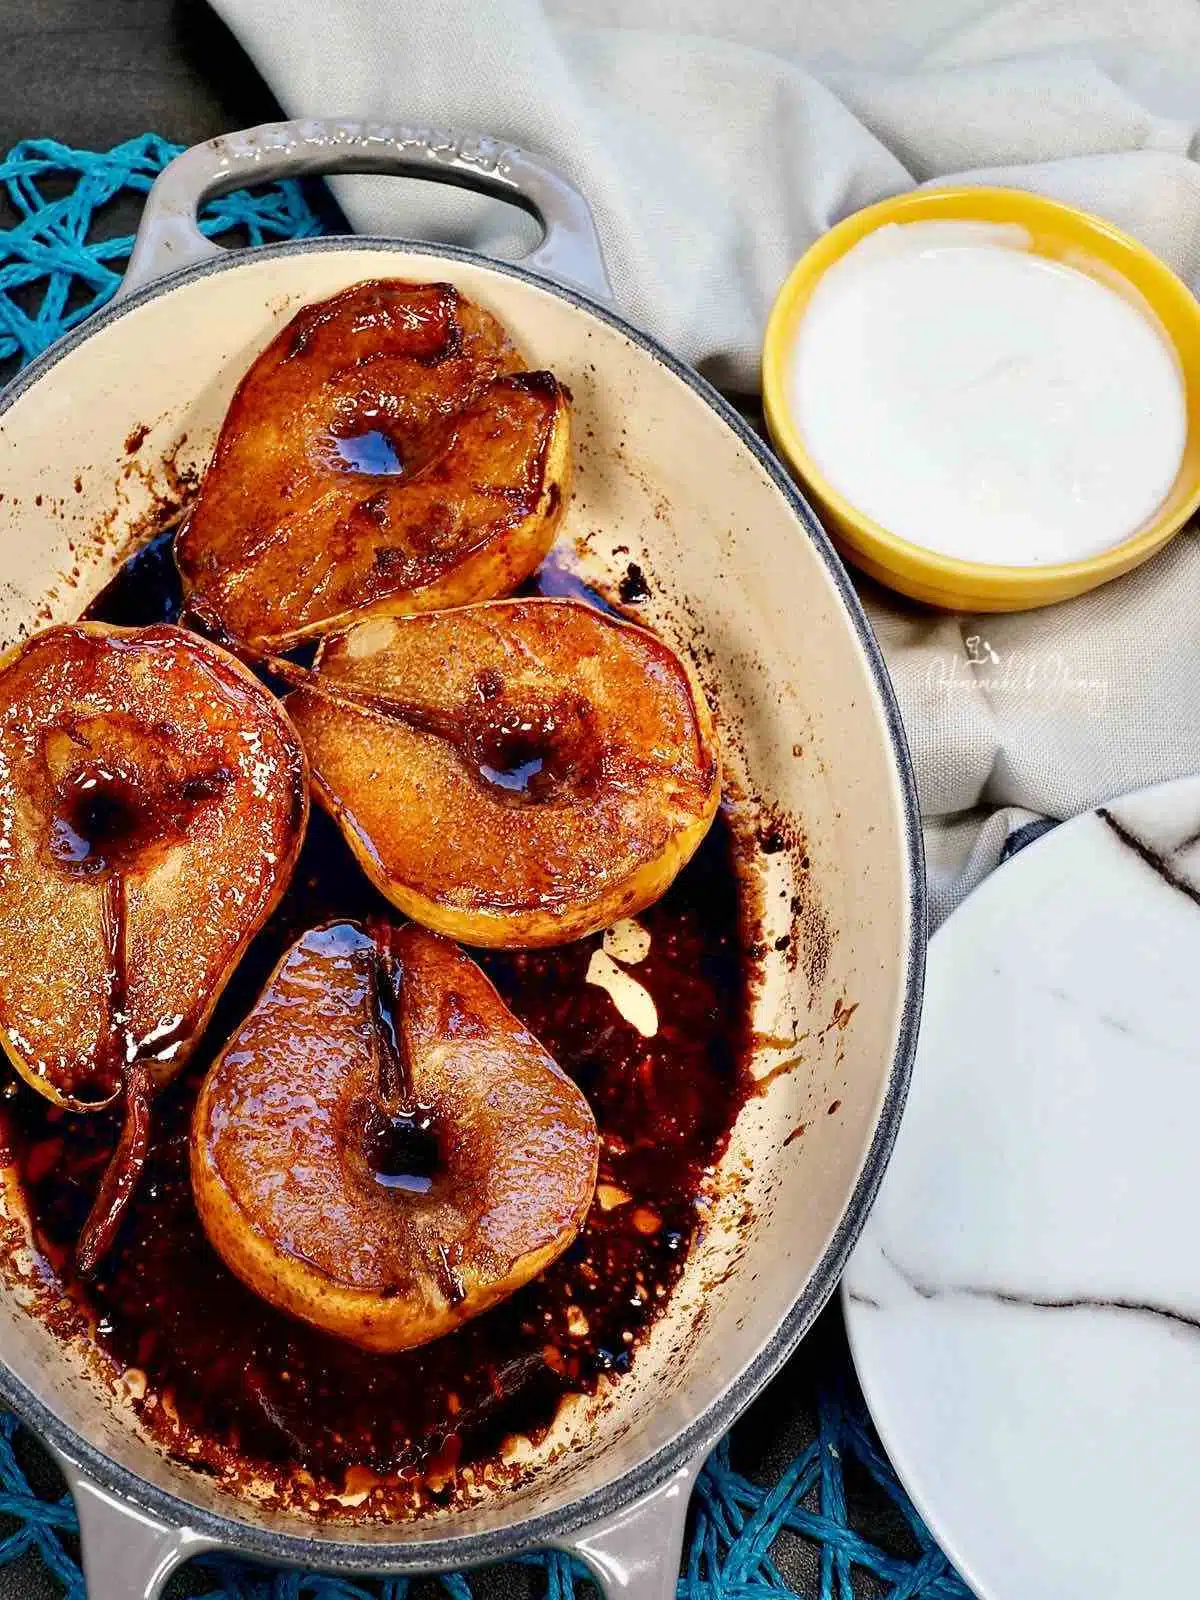 Easy roasted pears recipe with espresso balsamic glaze.